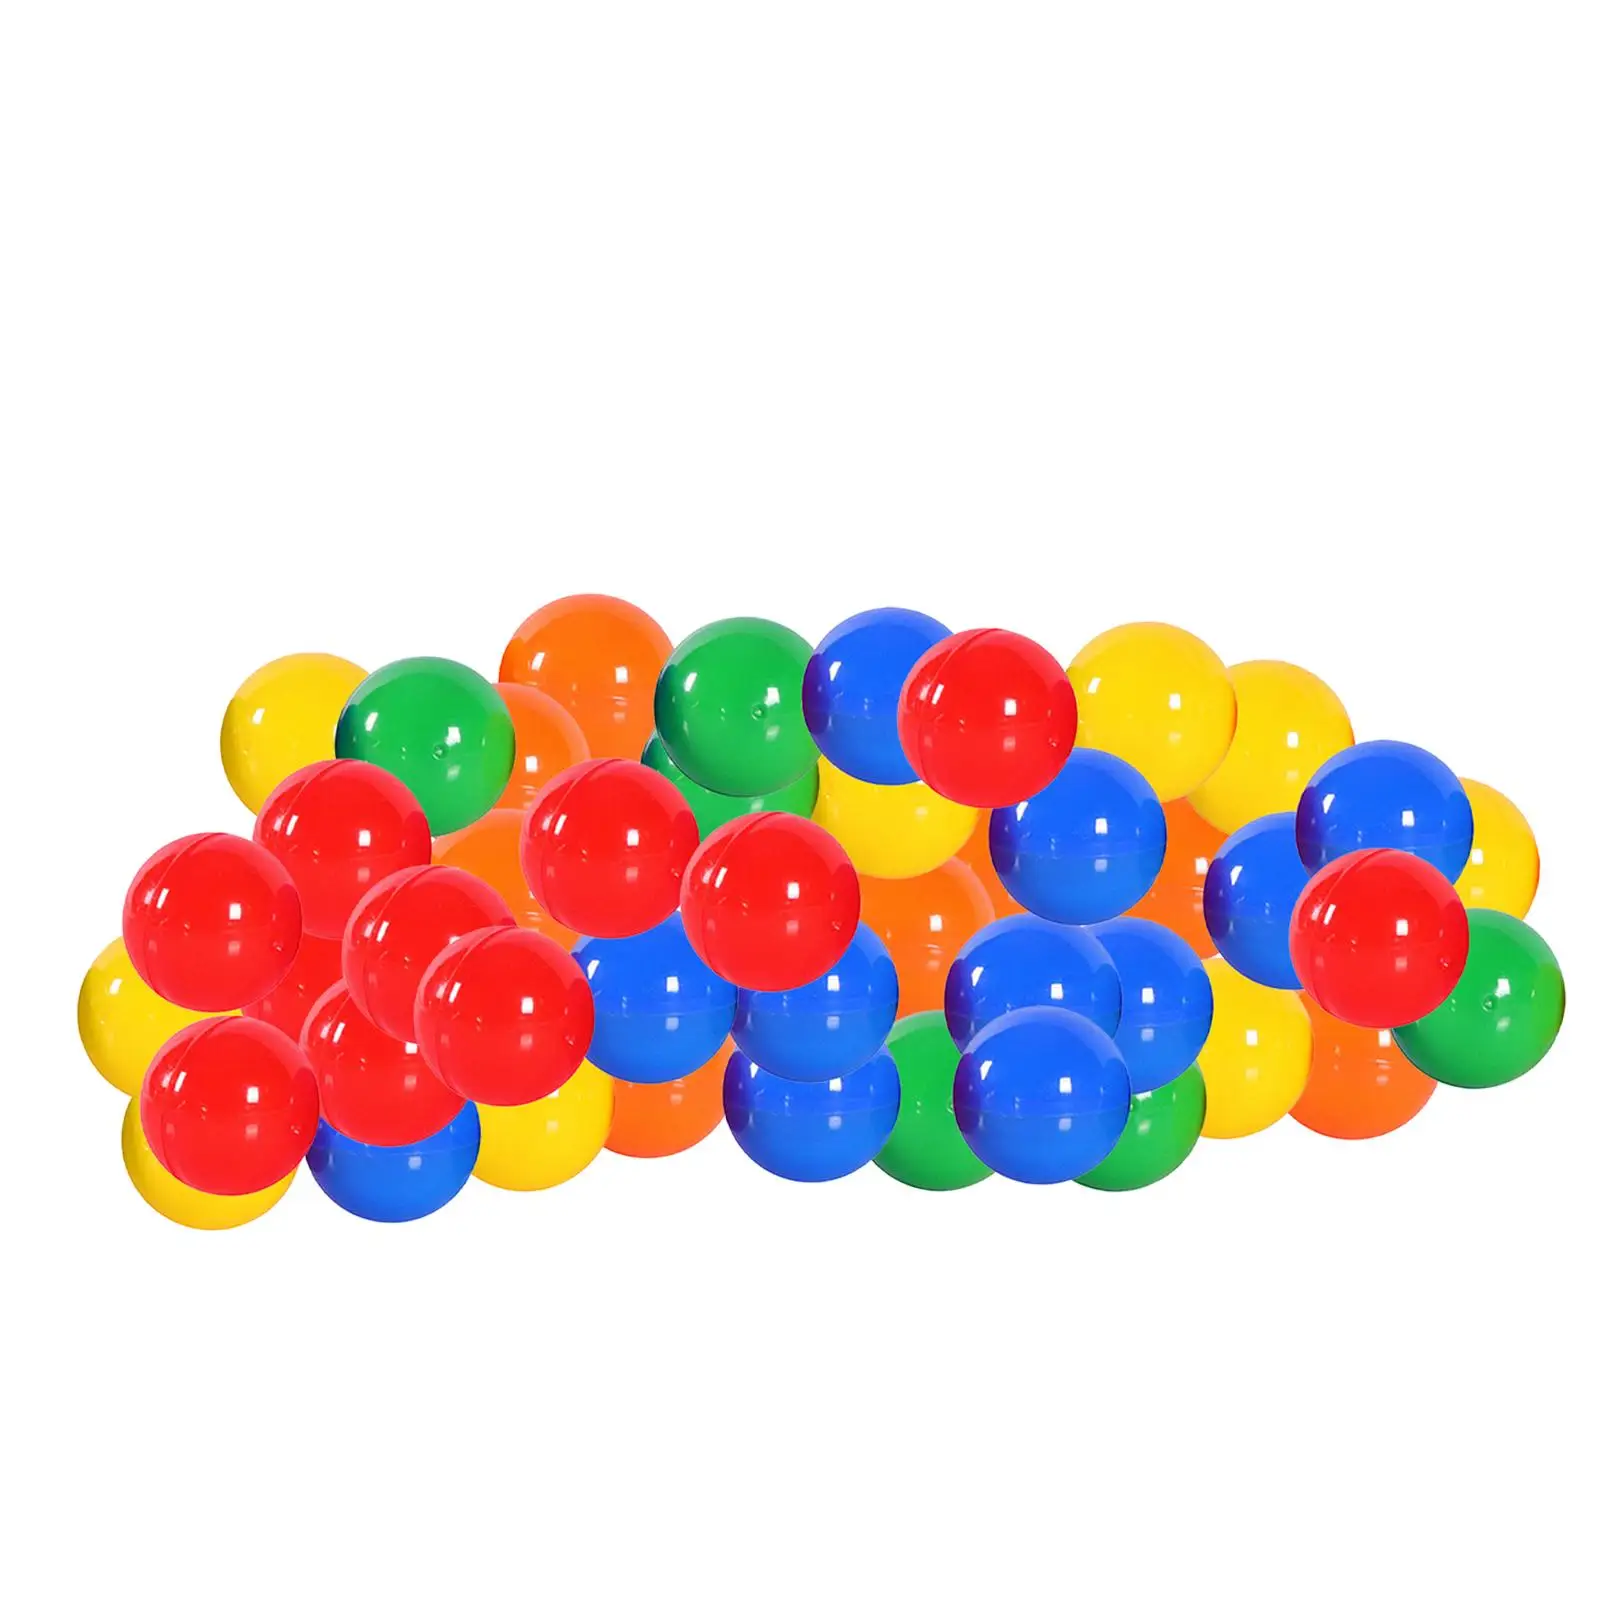 50 Pieces Bingo Ball Portable Direct Replaces Fittings Tally Ball for Company Large Group Games Camping Household Entertainment